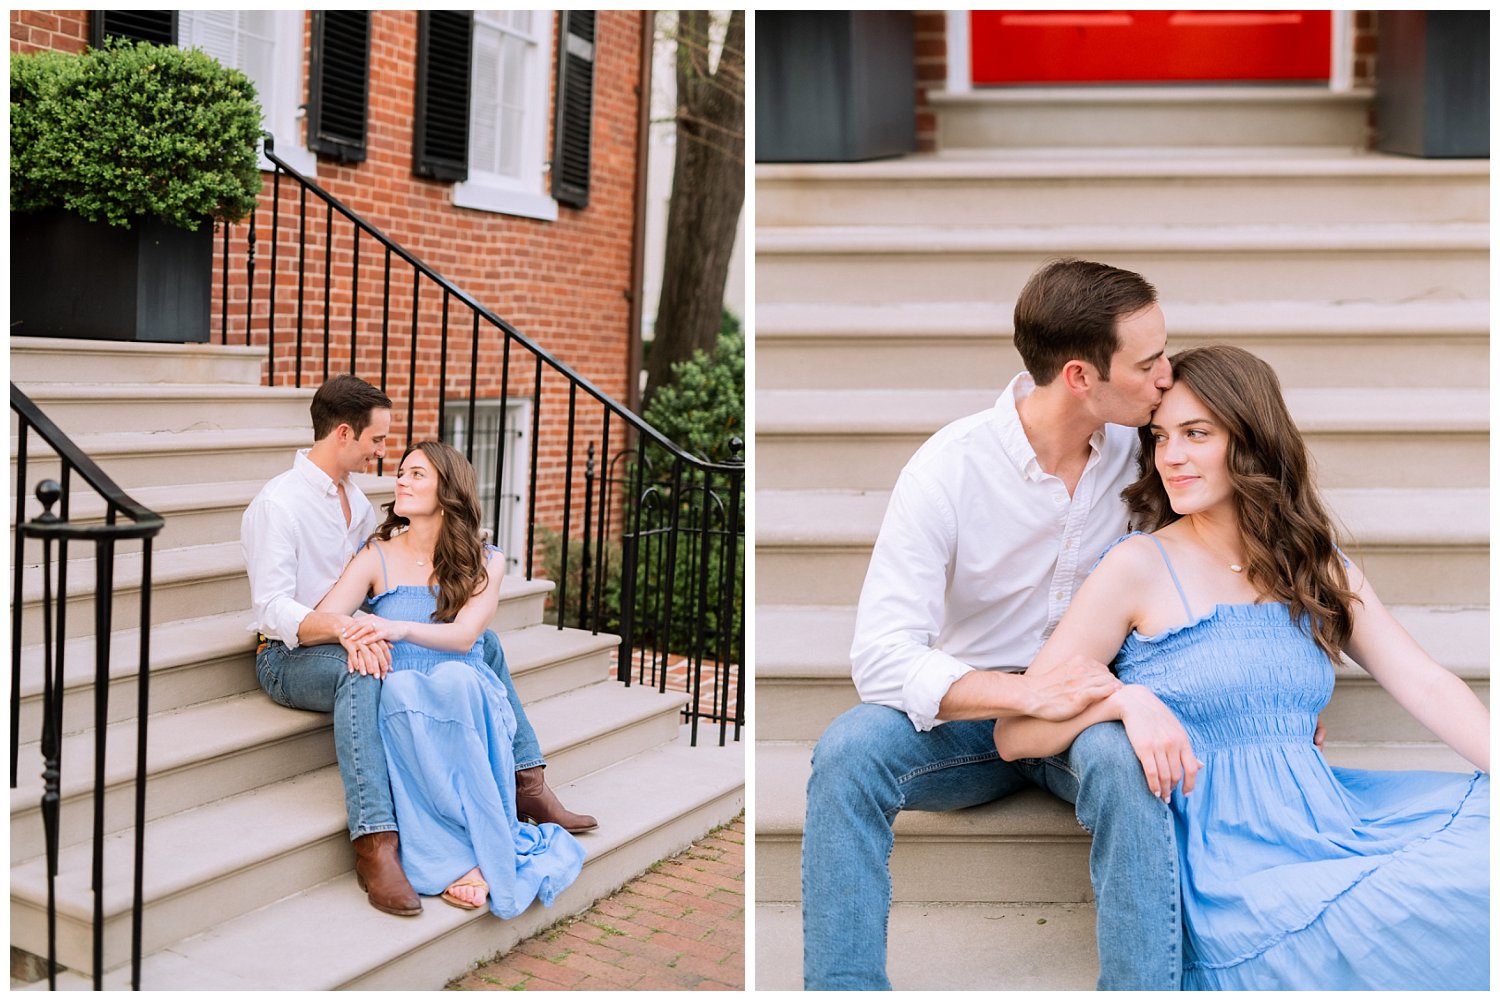 Intimate city engagement session in Georgetown, DC. Photographed by Southern Virginia photographer Heather Dodge.